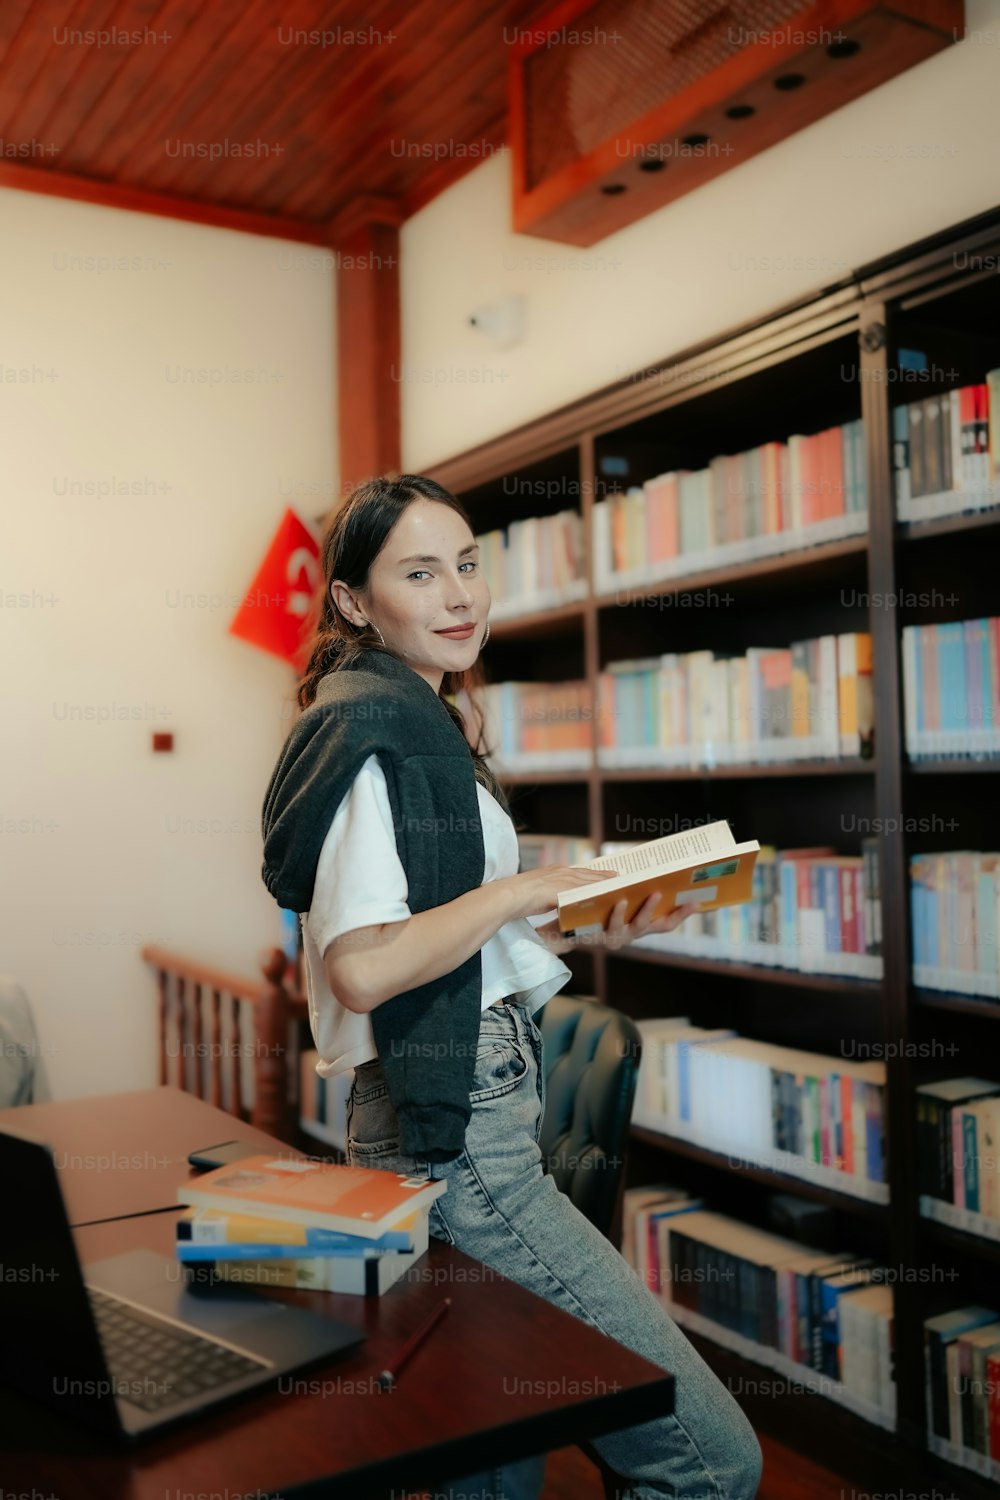 a woman standing in front of a bookshelf holding a book